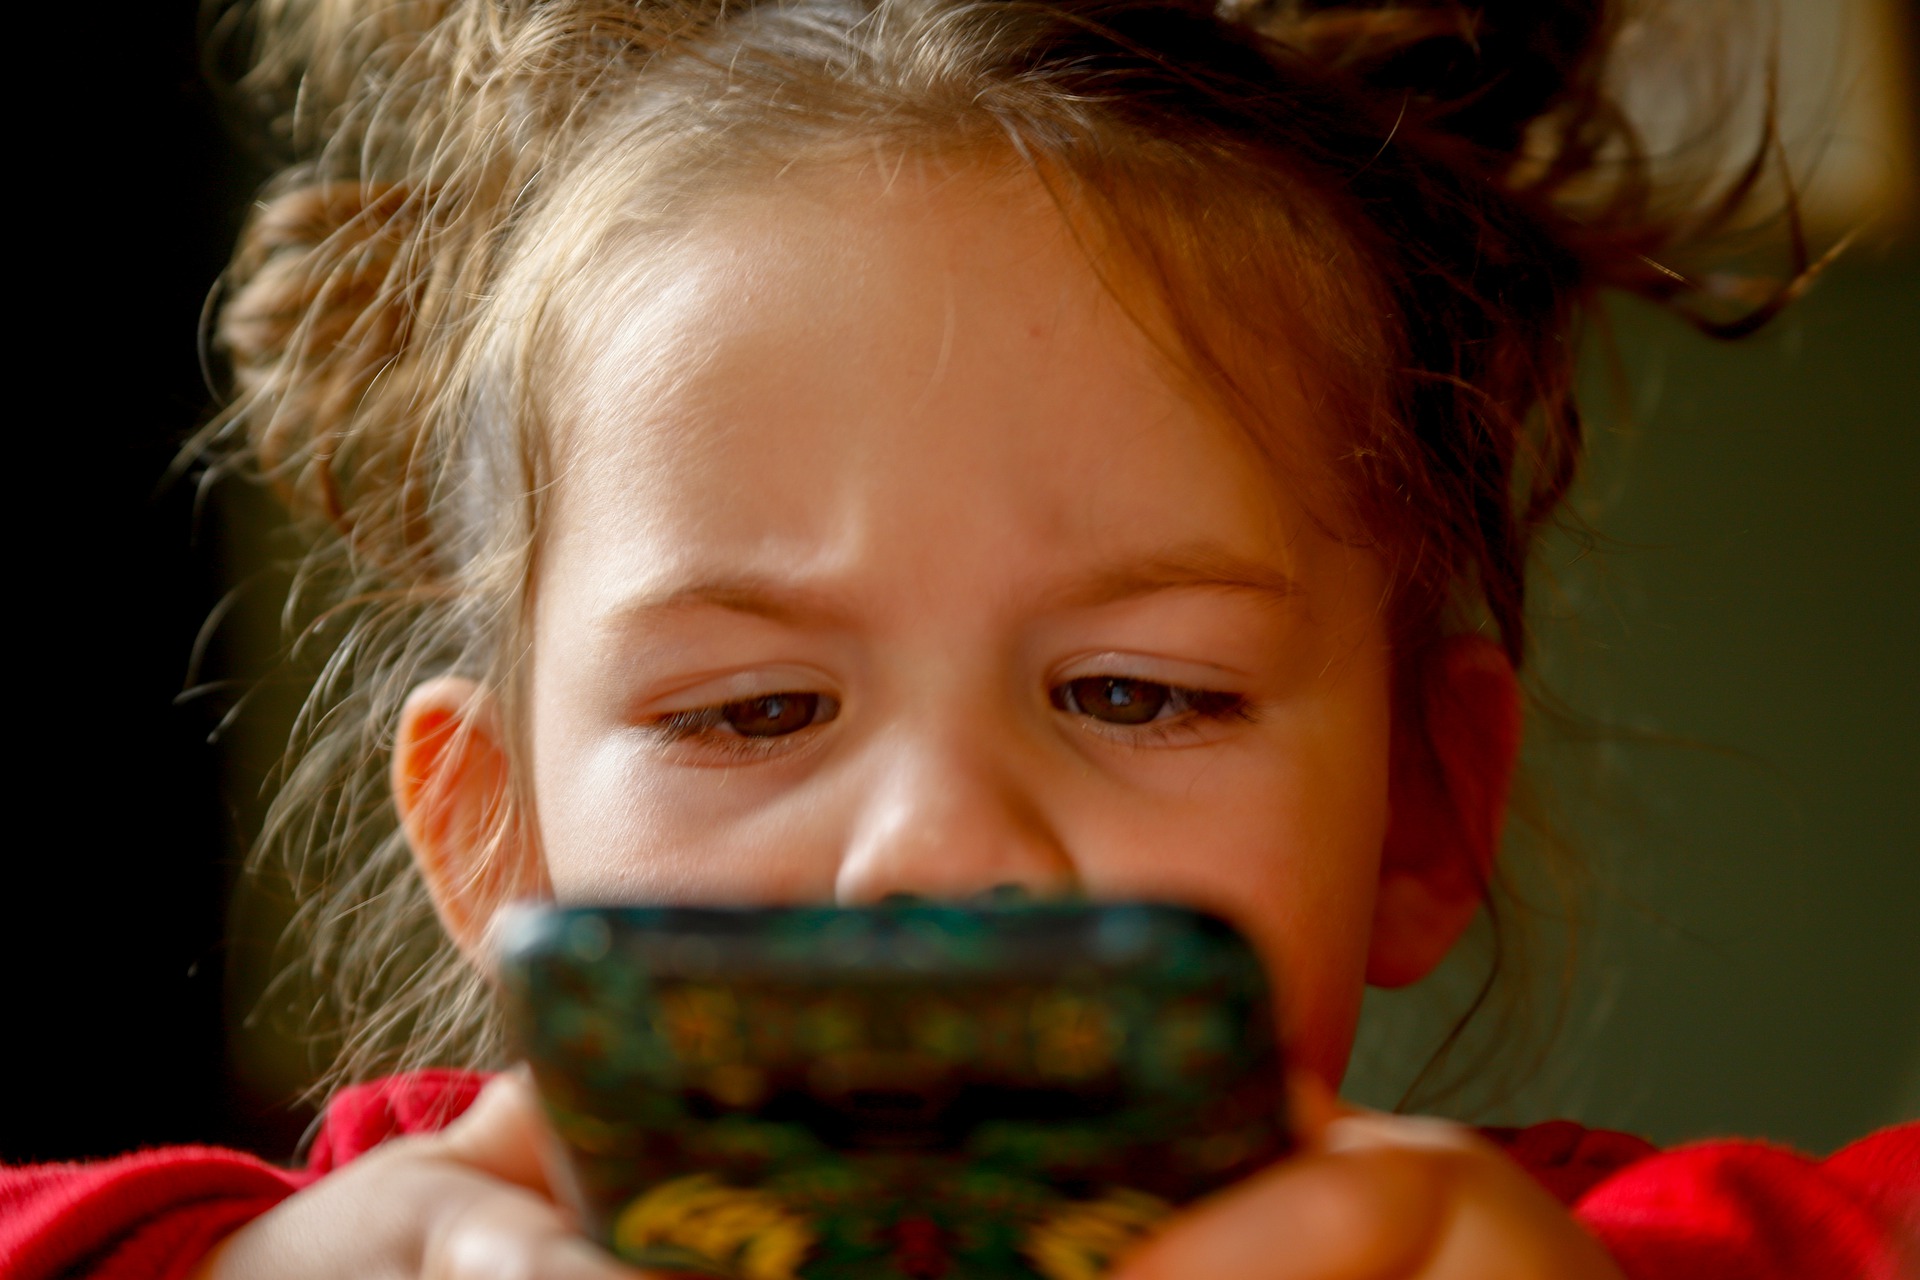 Young girl playing with phone